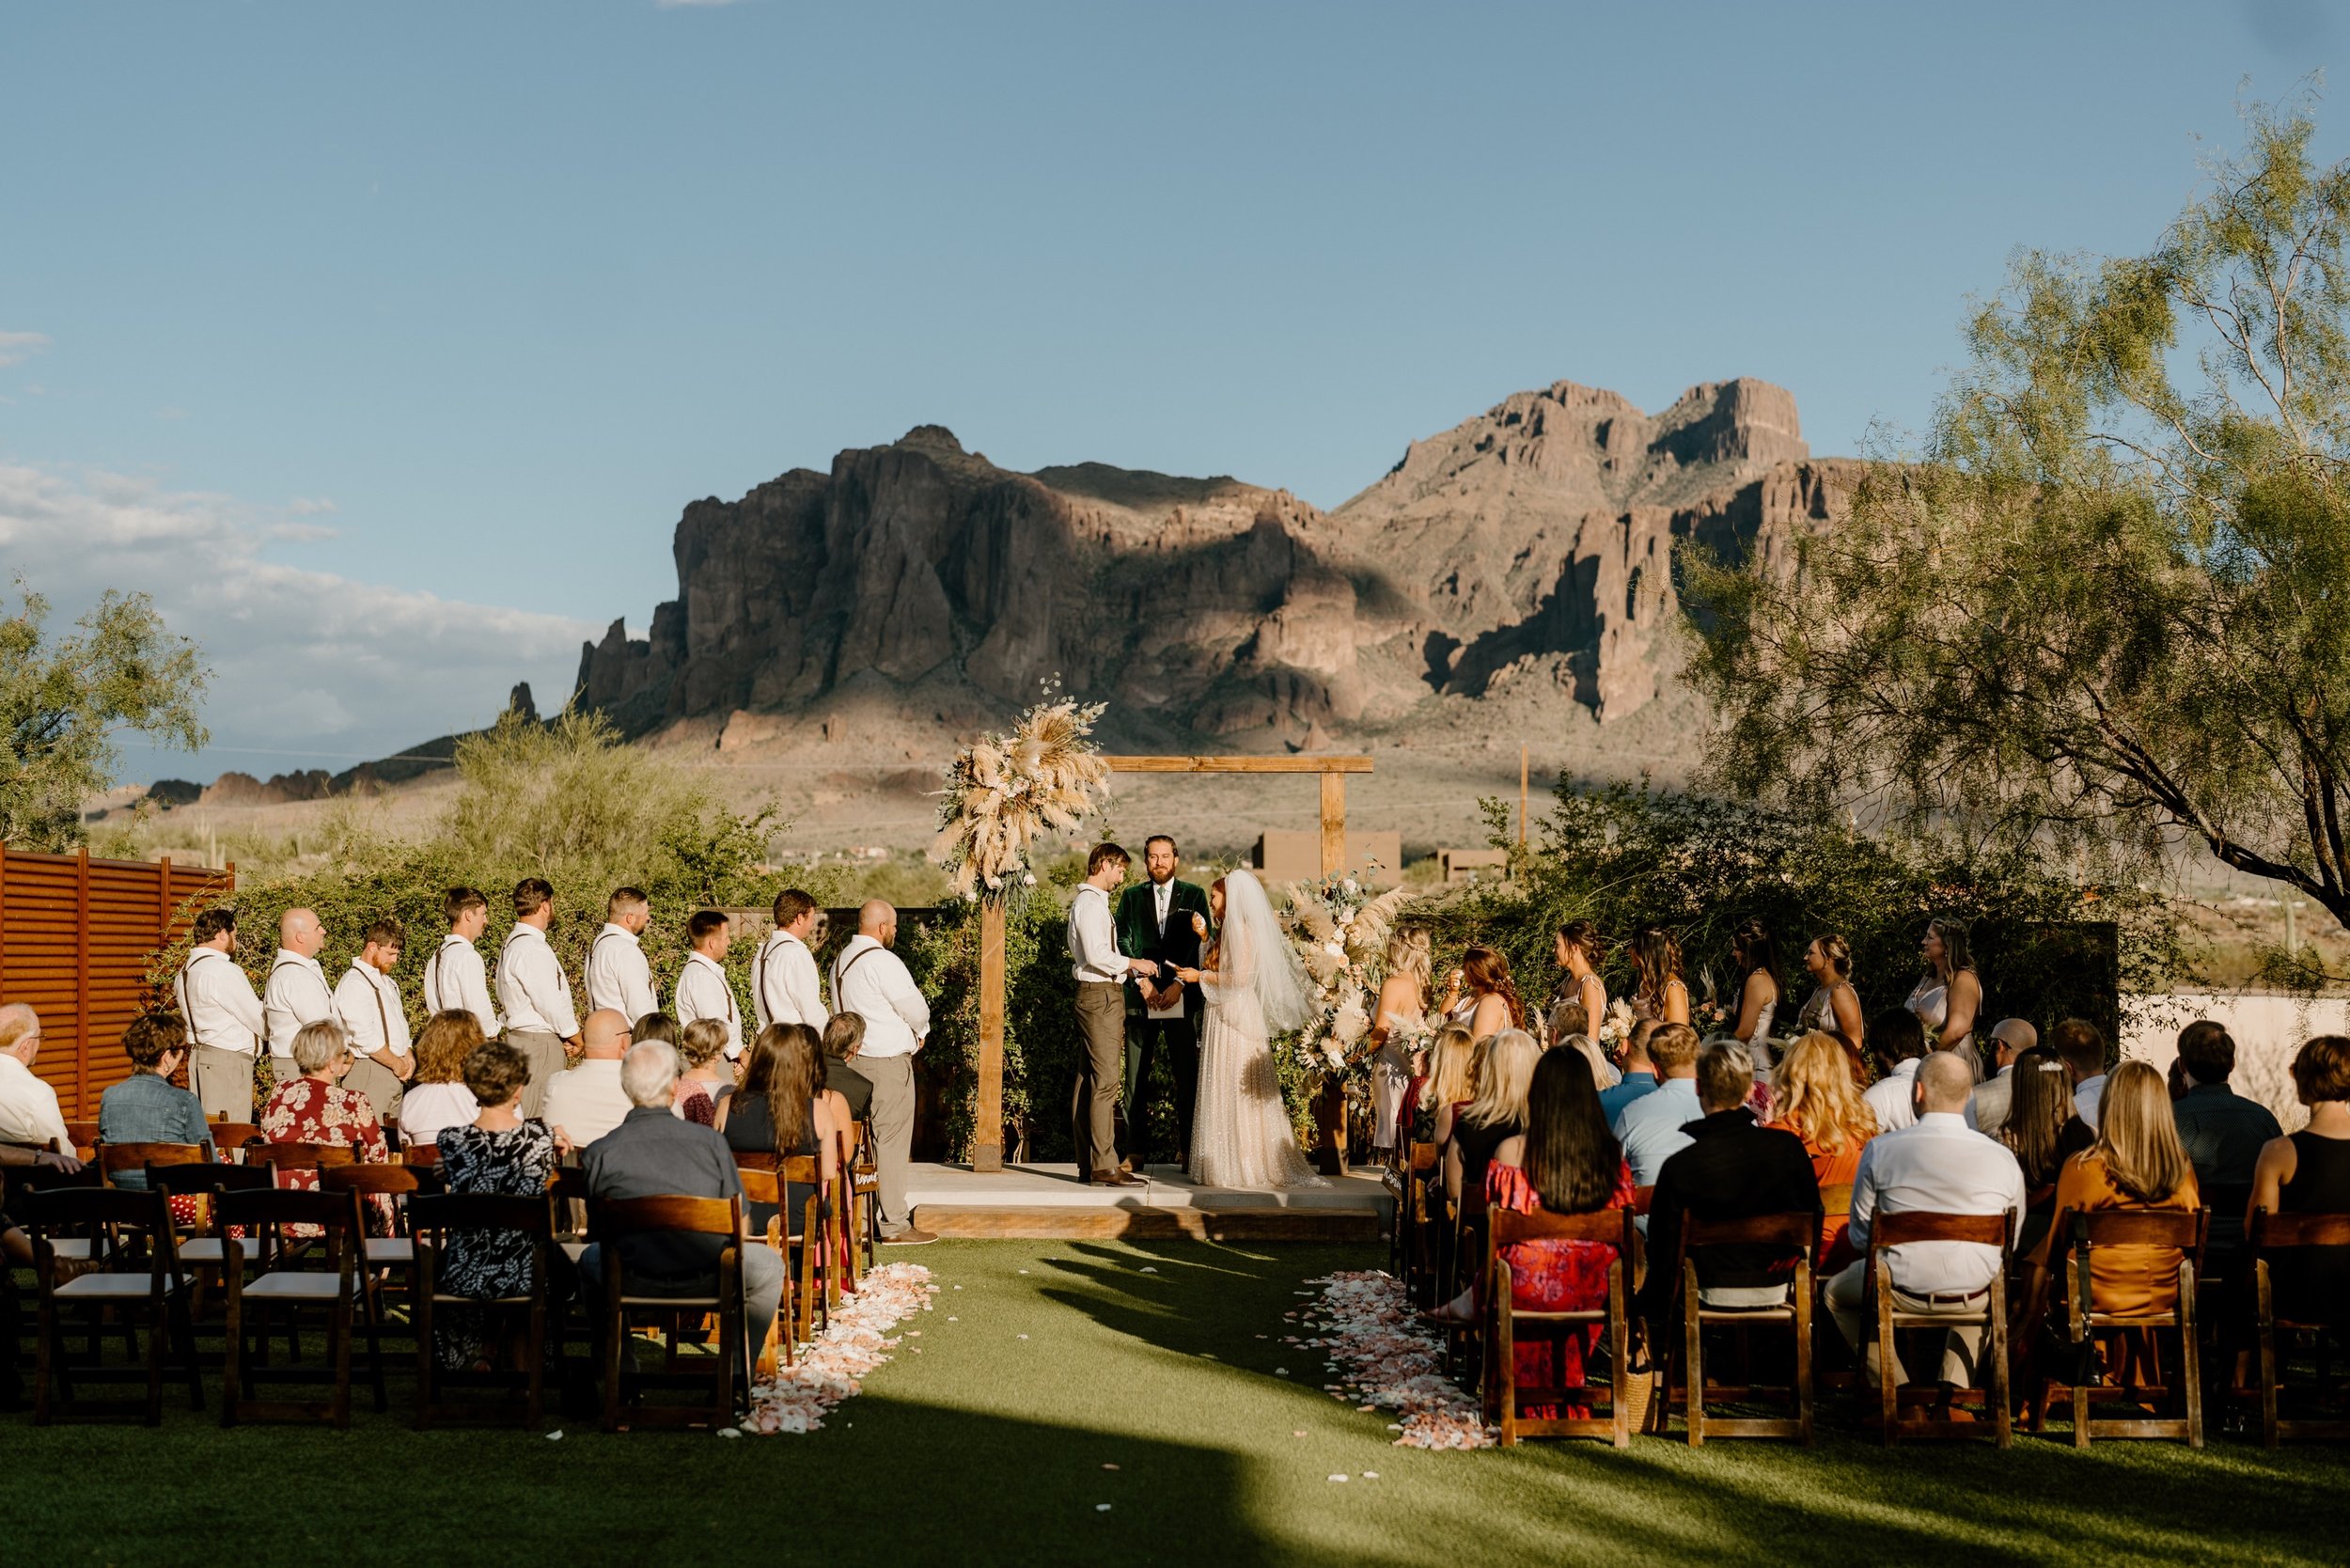 021_Wedding at The Paseo venue in Apache Junction, Arizona only 45 minutes from Phoenix..jpg